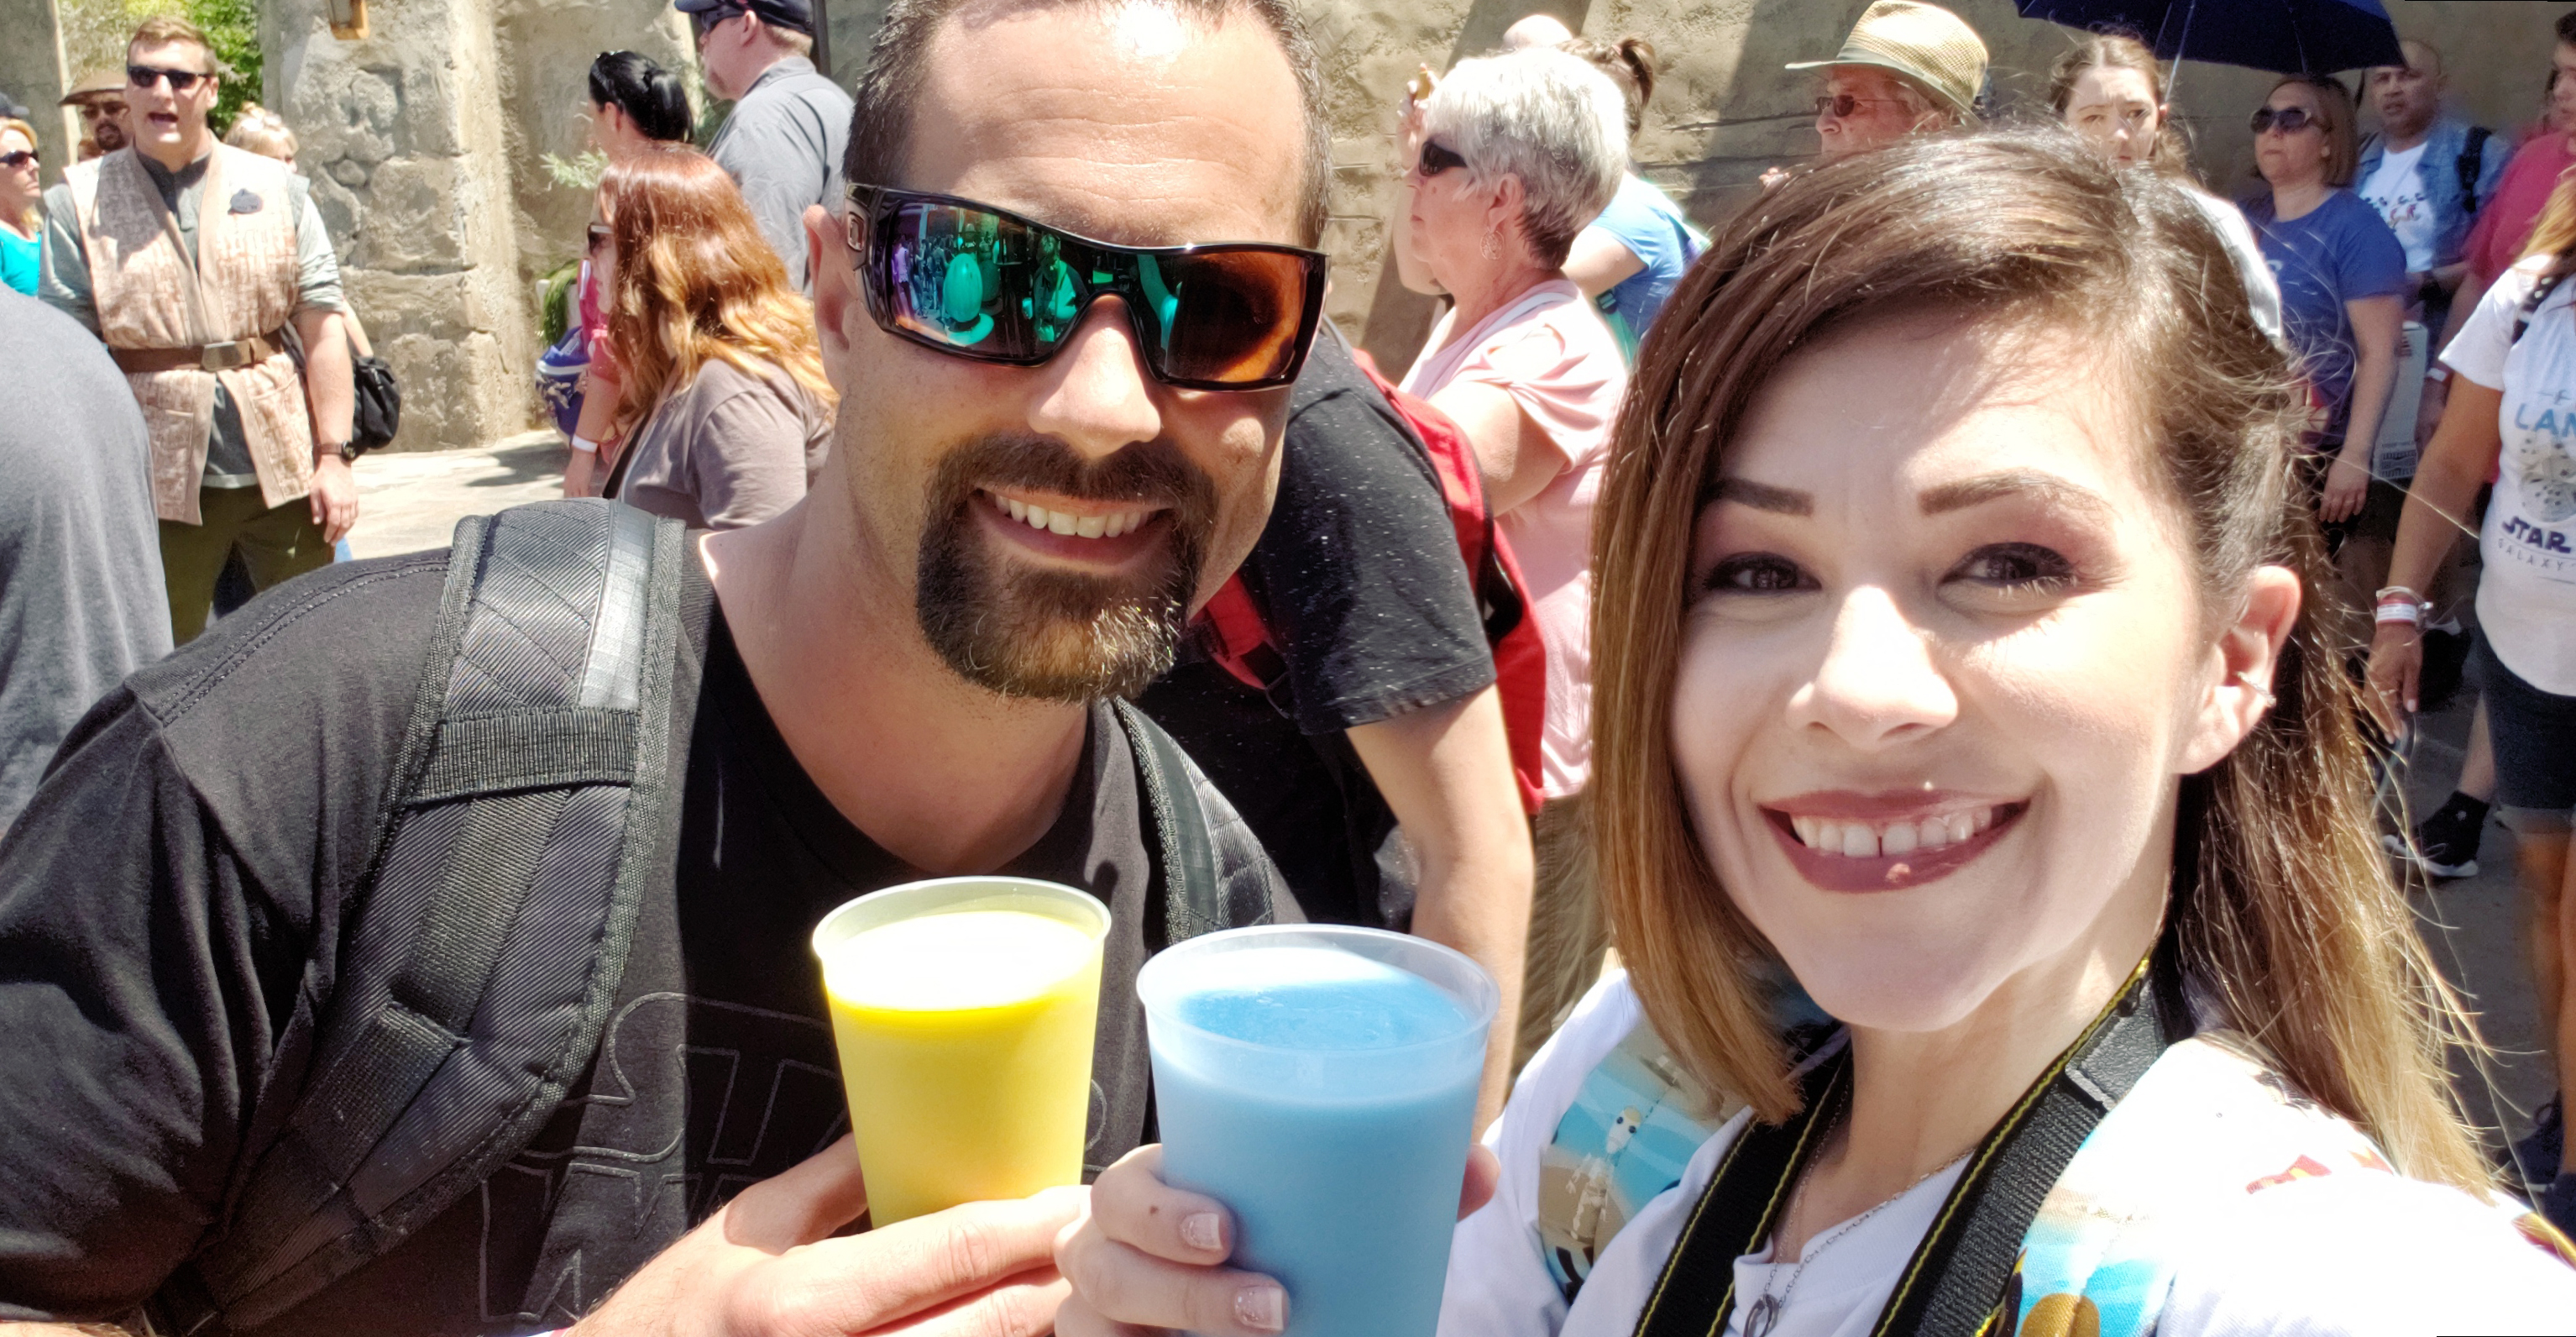 Galaxy's Edge: My Experience on Opening Day | Anakin and His Angel